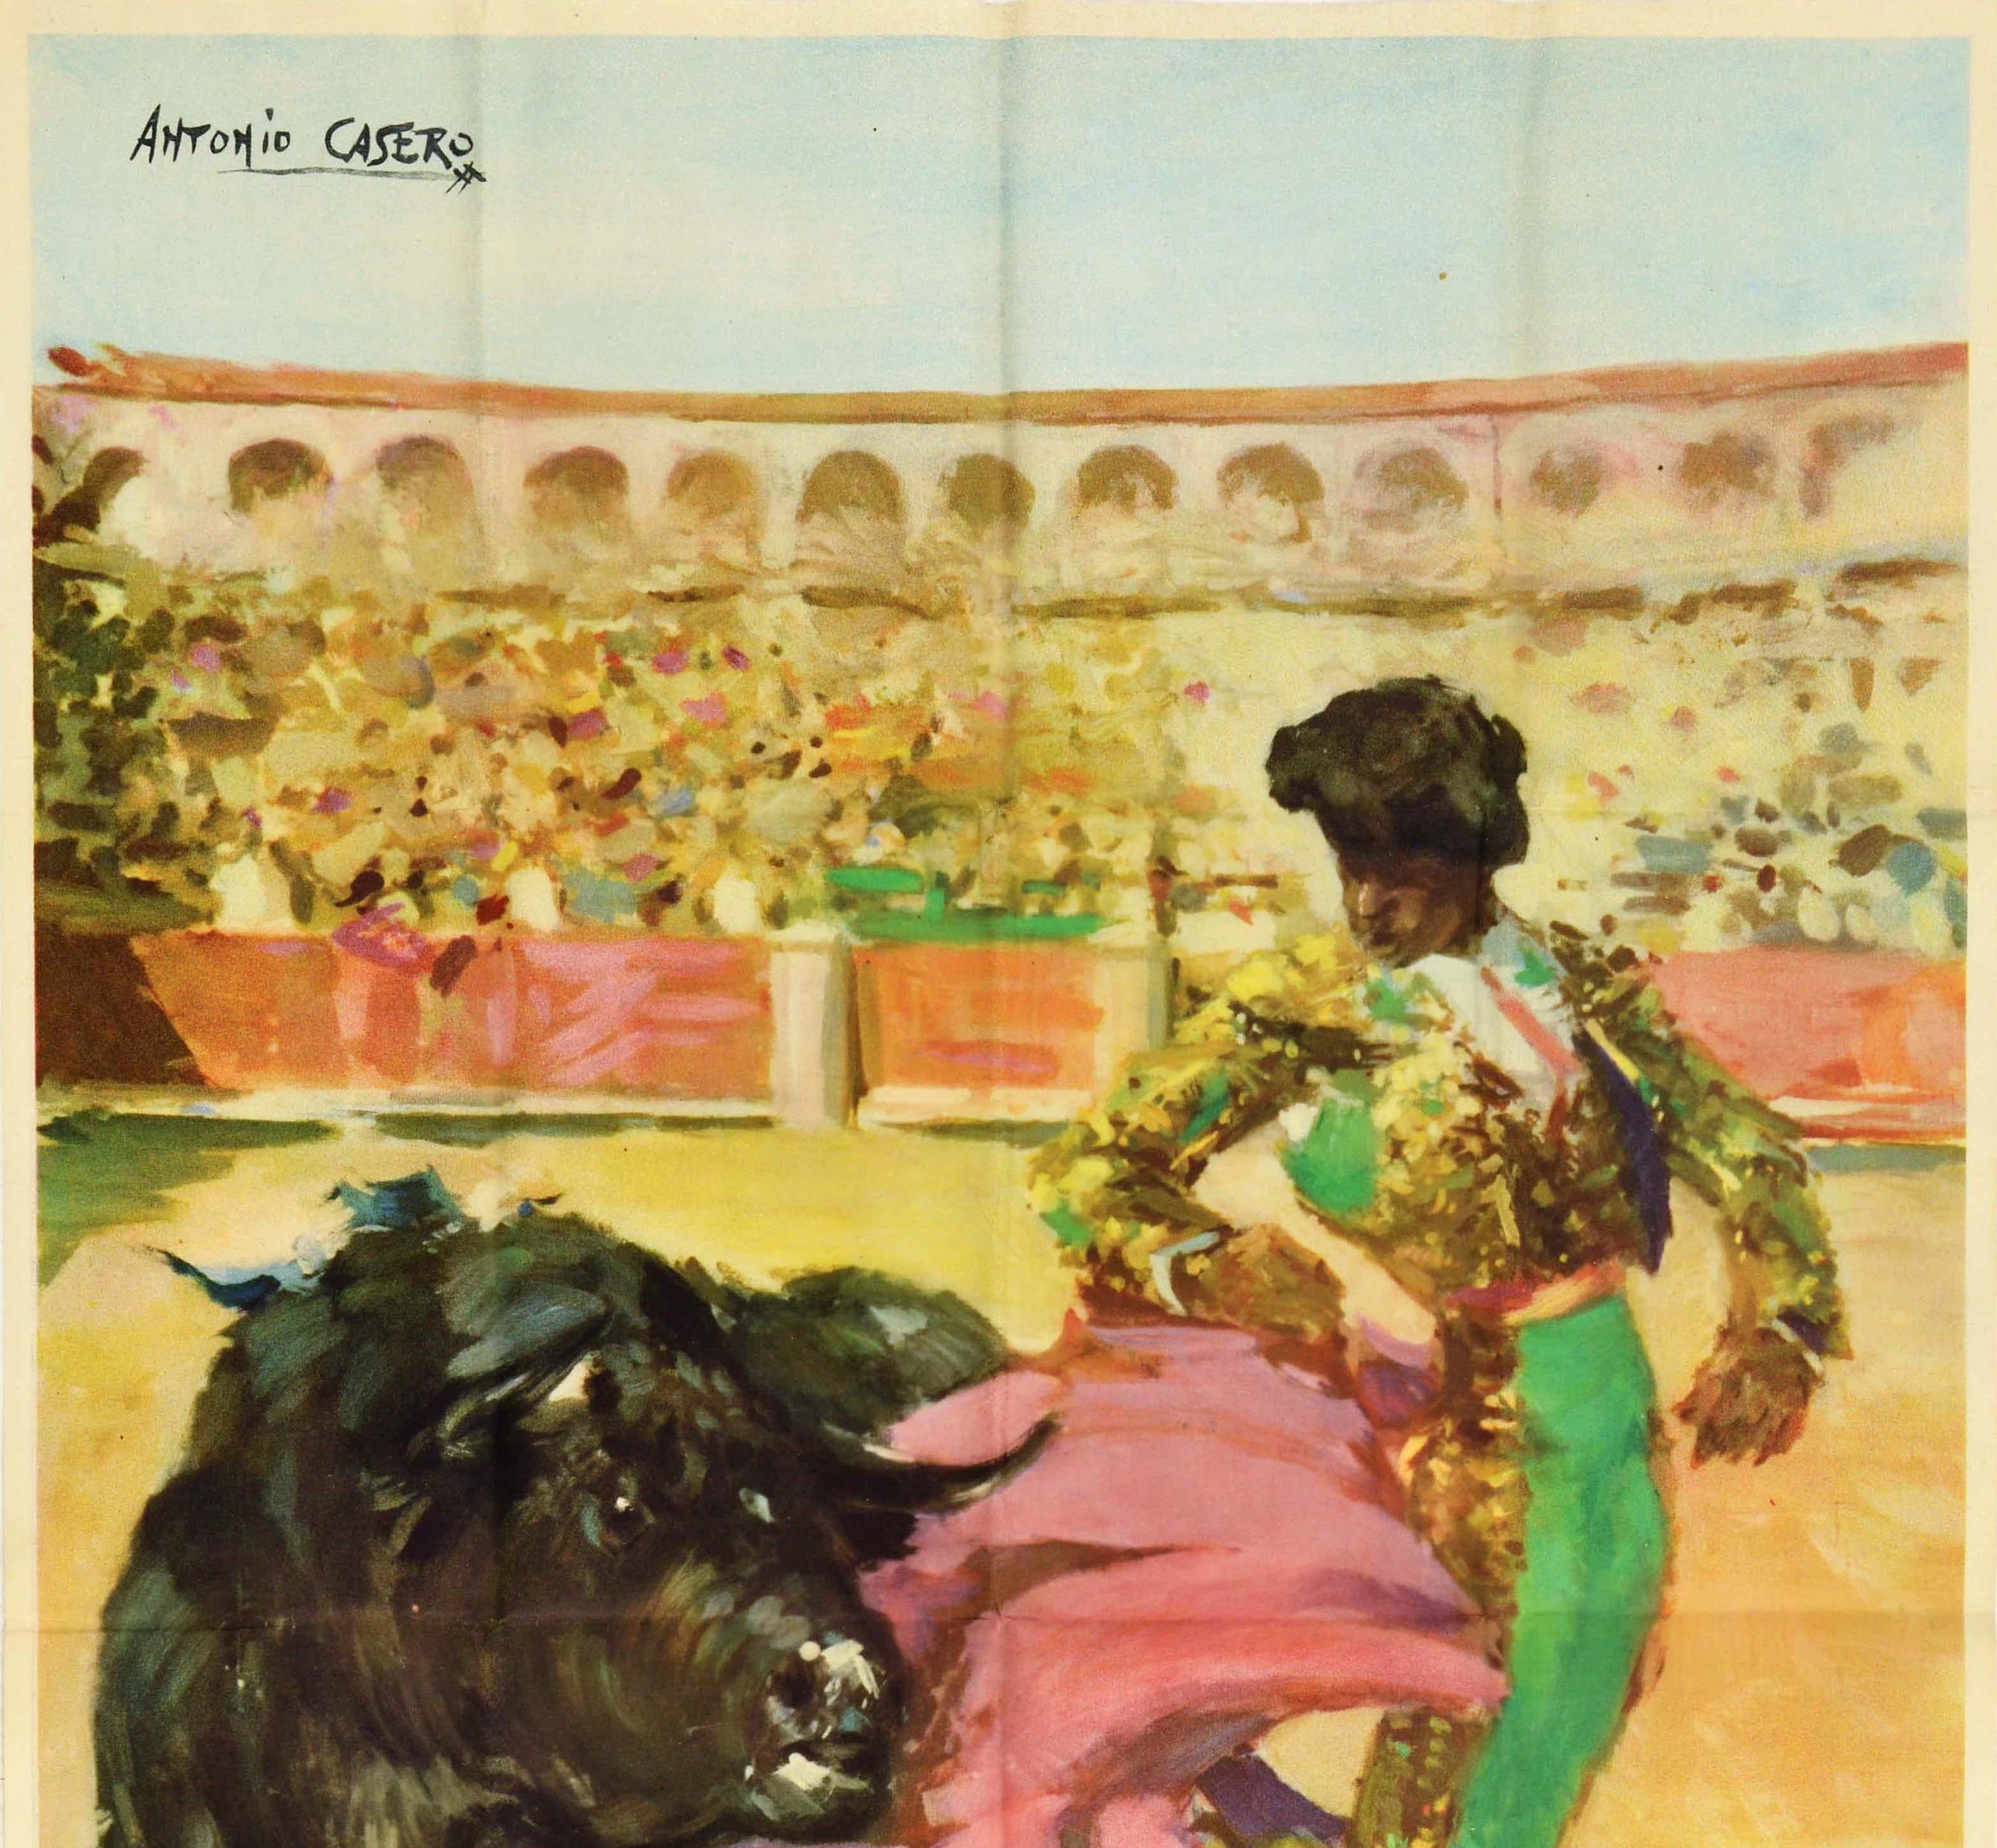 Original vintage travel poster advertising The Fiesta de Toros in Spain featuring a colourful design by Antonio Casero (1897-1973) of a bull fight with the torero / matador in a gold and green outfit being circled by a bull in a bullring arena full